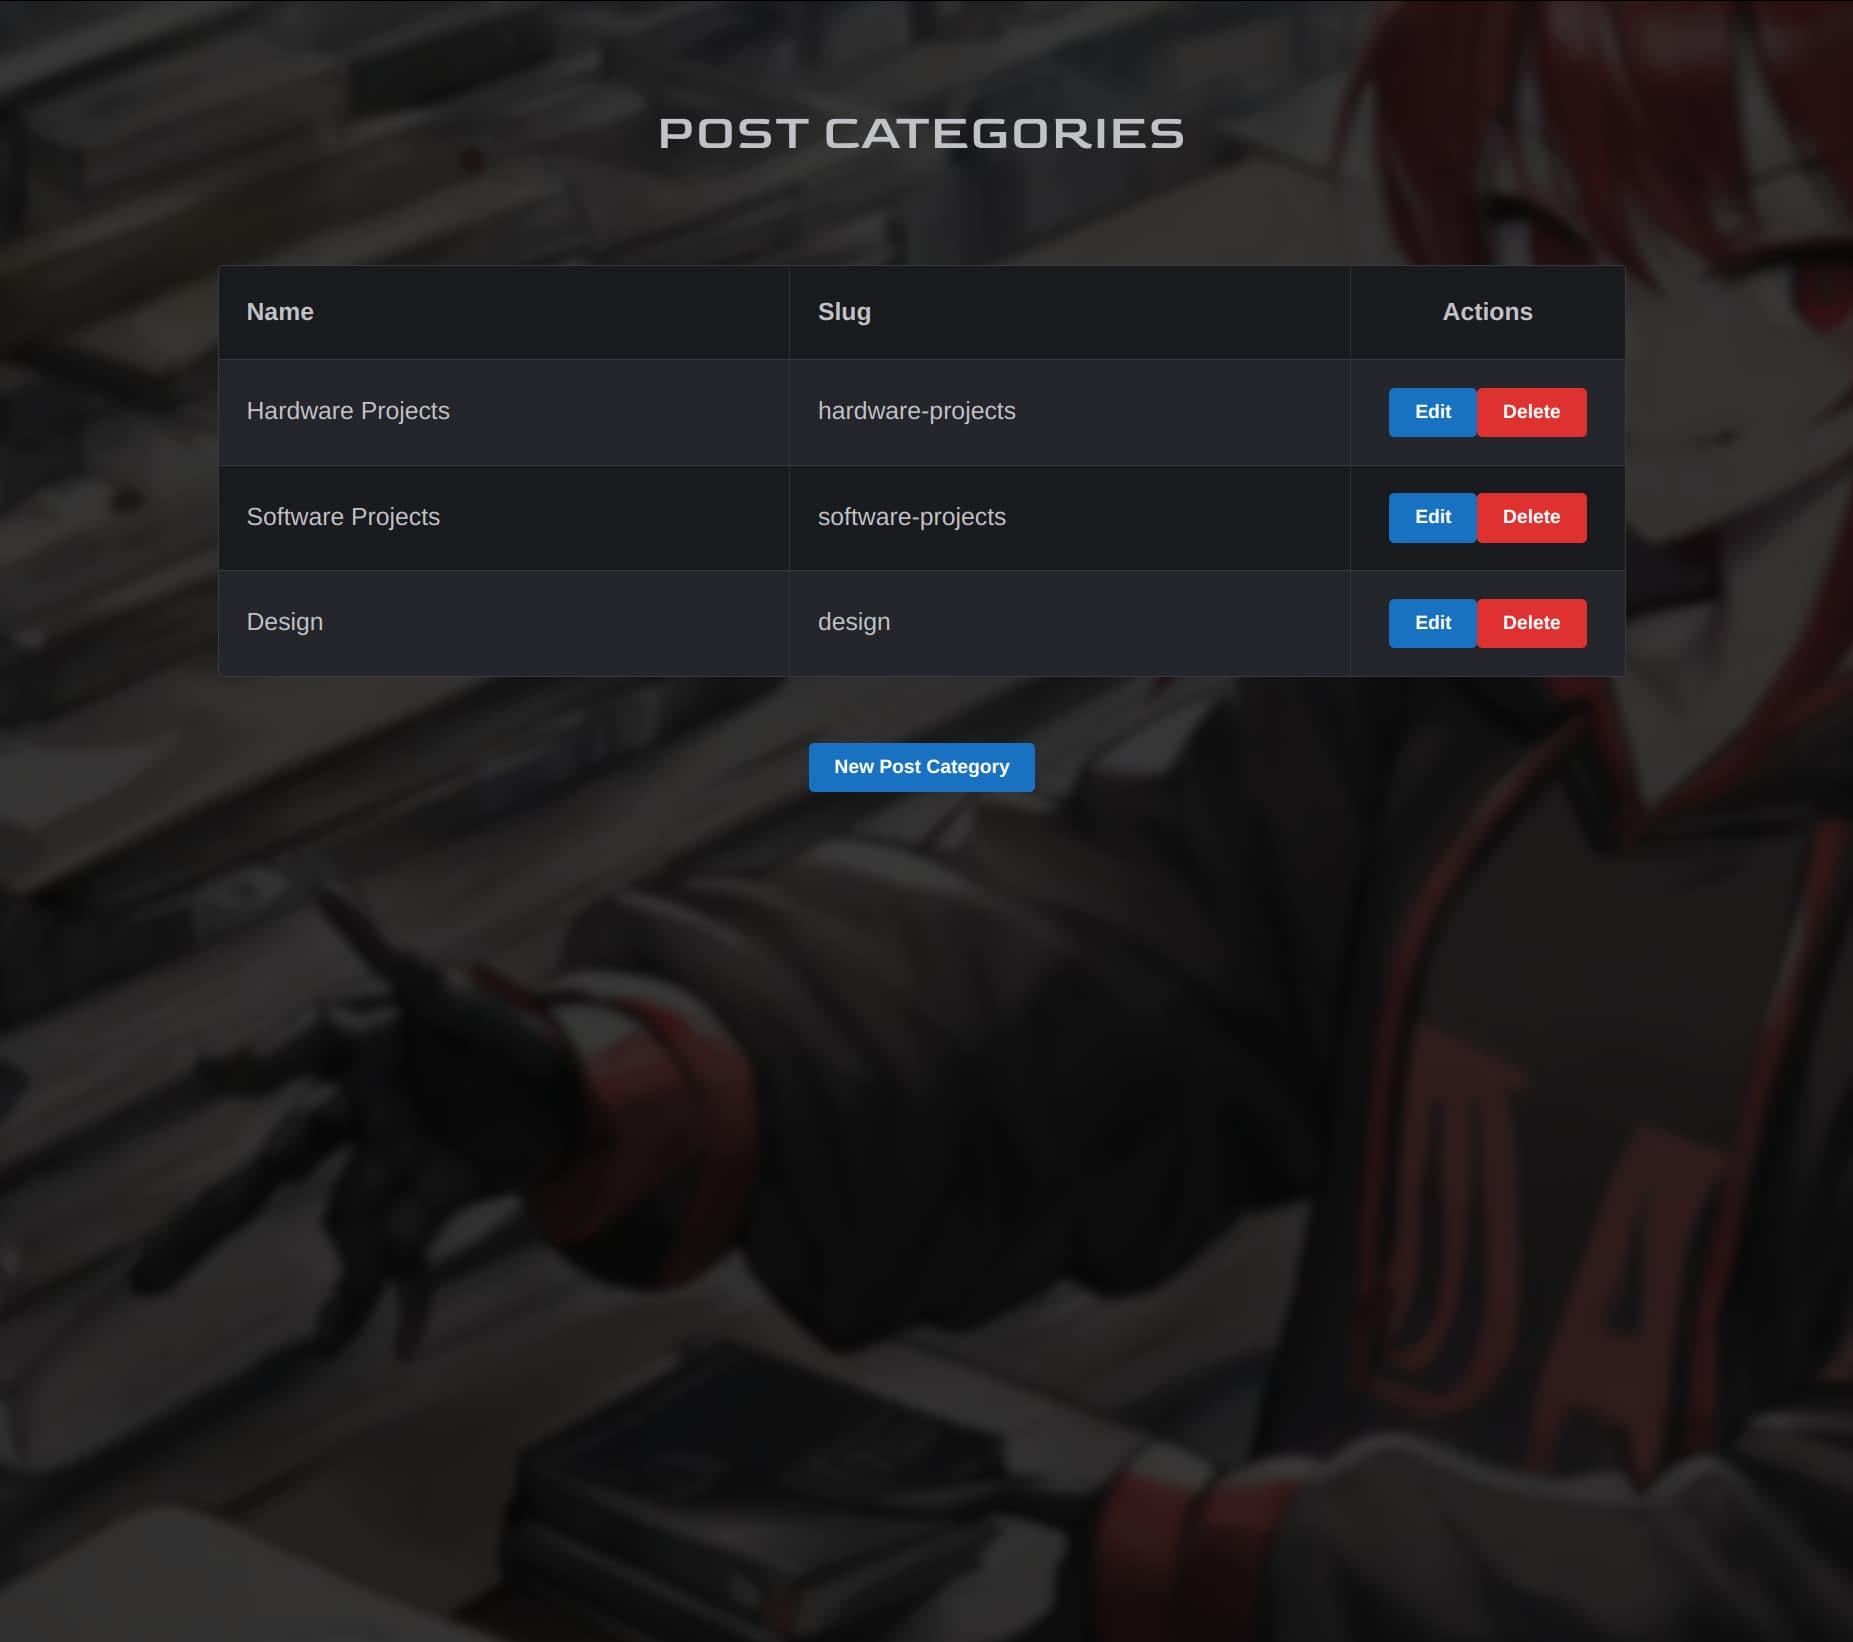 The post categories page is very similar to the project categories page, but with different categories to manage